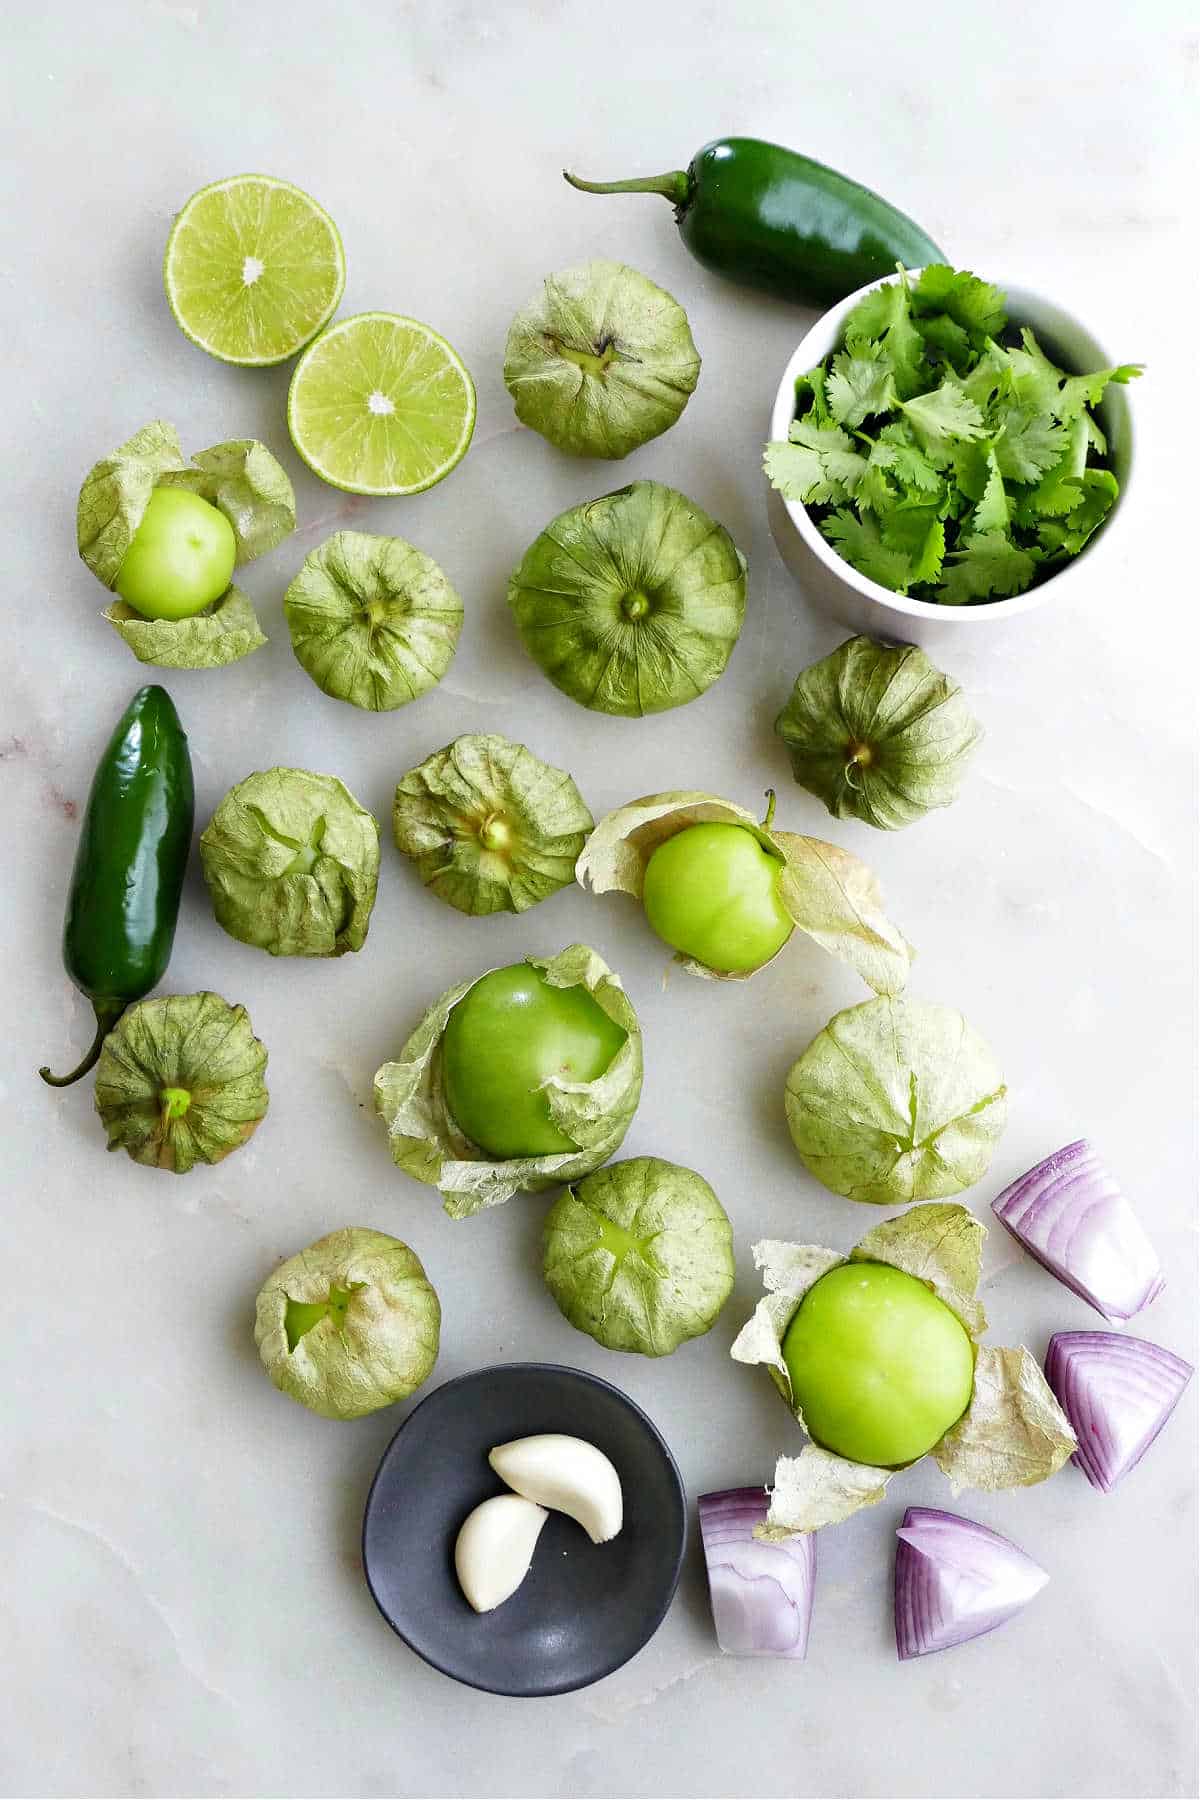 tomatillos, jalapenos, a lime sliced in half, garlic cloves, red onion, and cilantro leaves on a counter